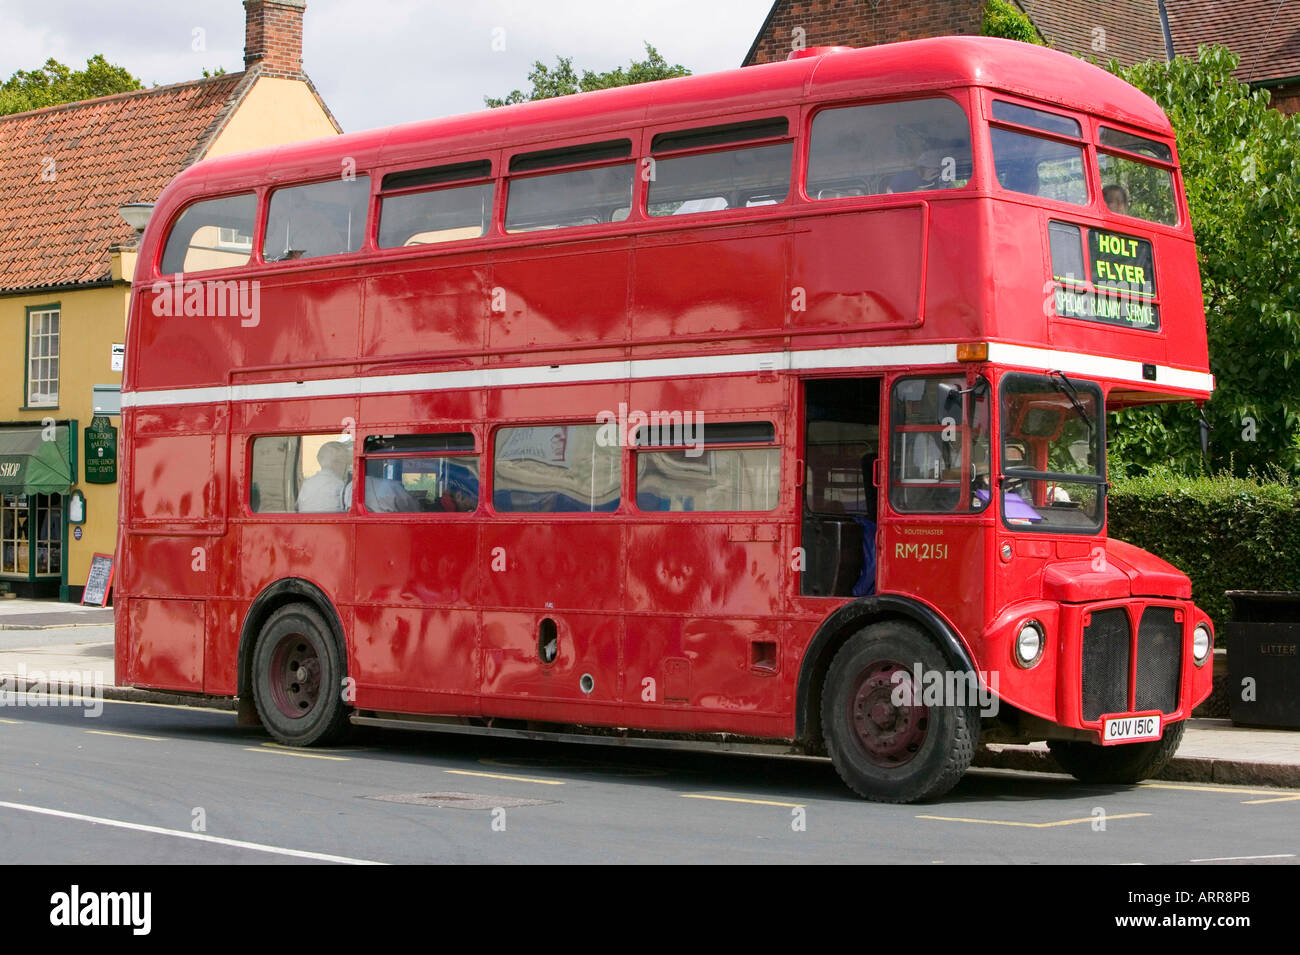 a red london Bus in holt, norfolk, UK Stock Photo